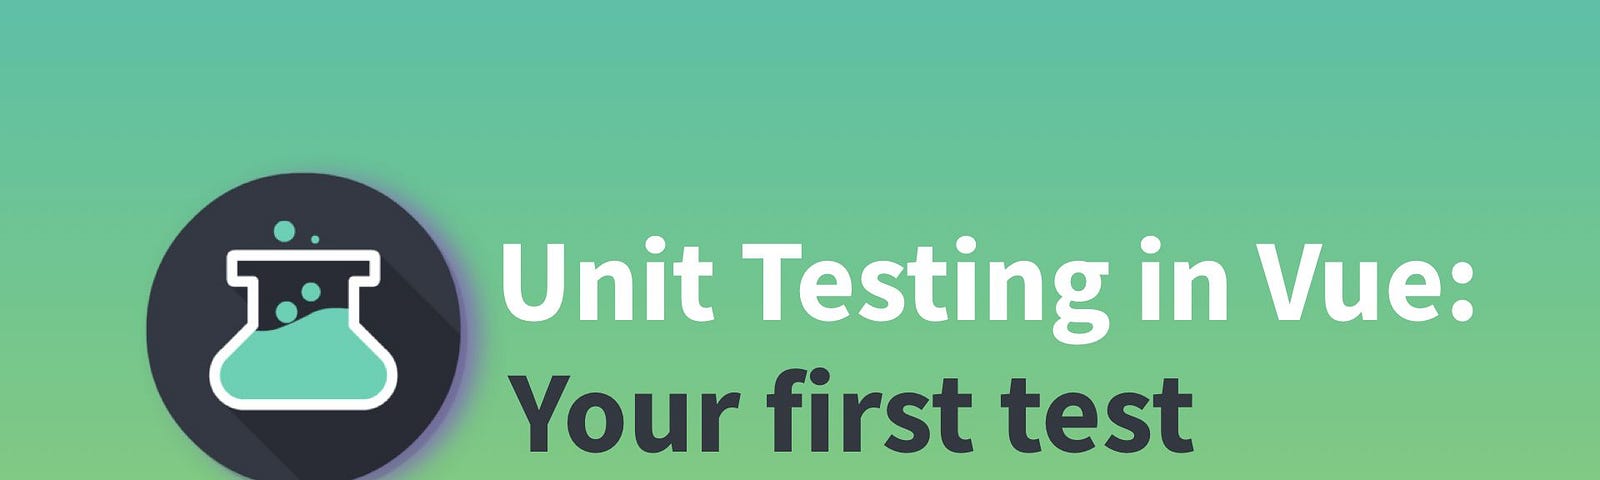 Unit Testing in Vue: Your first test